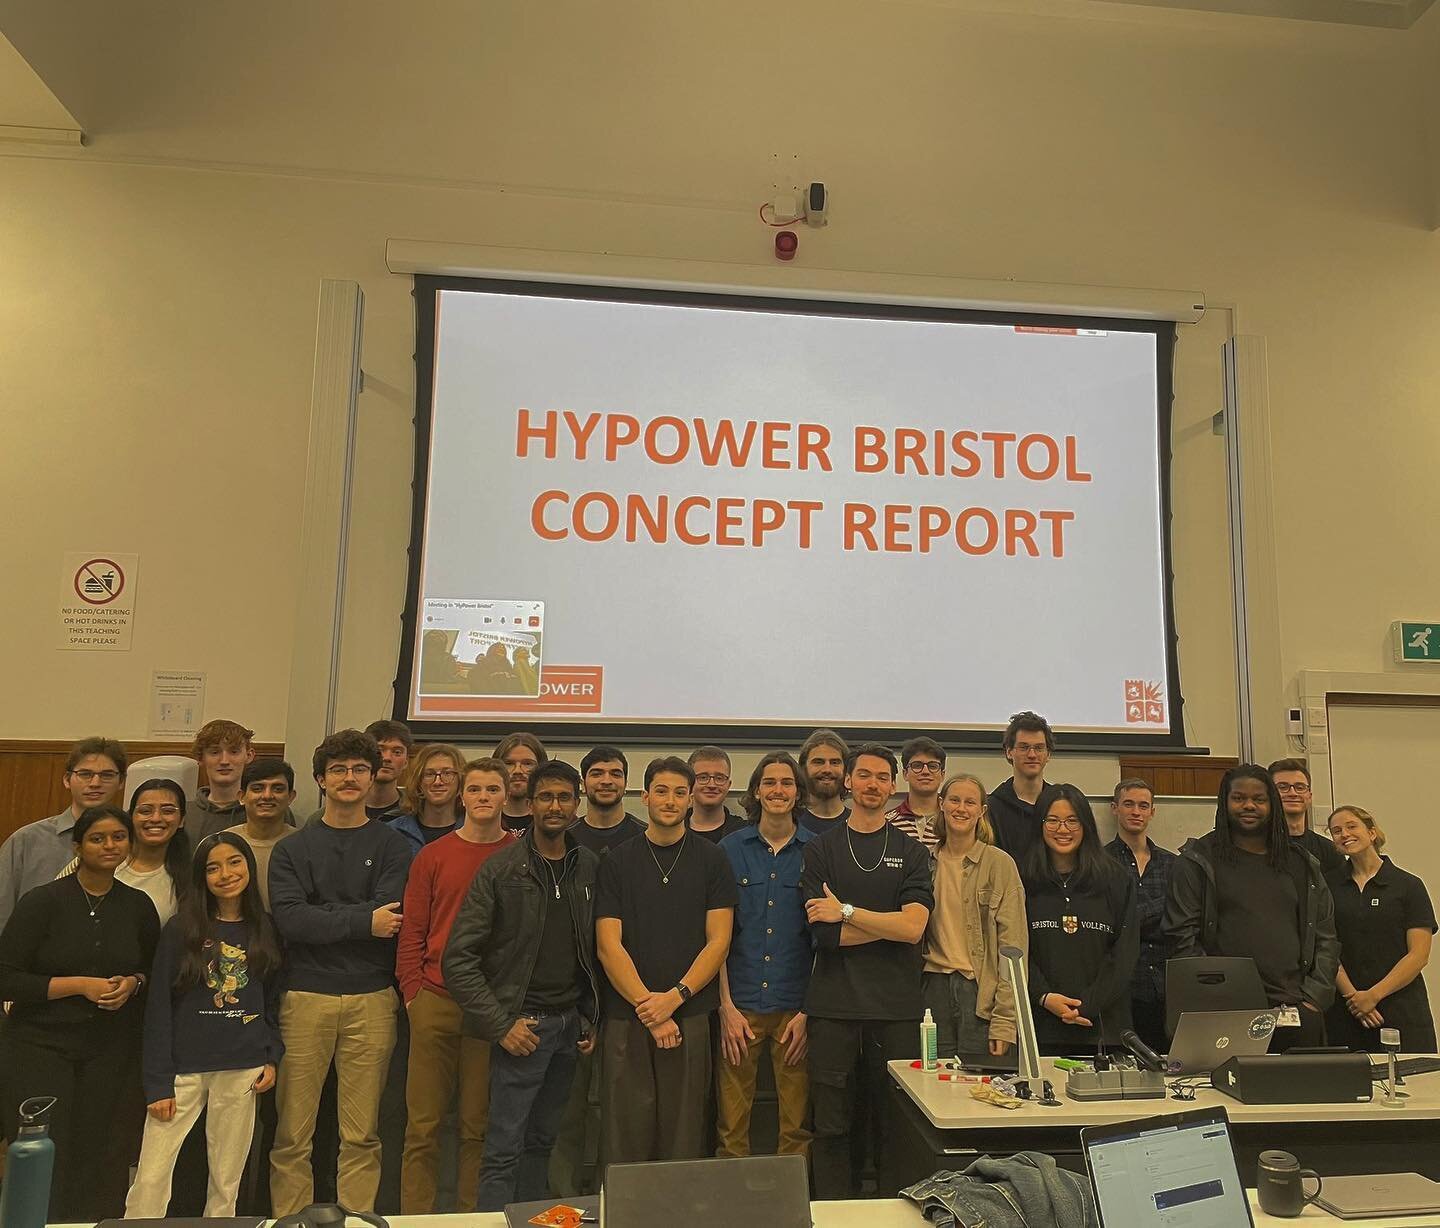 Beyond proud of our incredible team for their work this week to bring all of their research and design together! Thank you to all who presented, looking forward to this next phase of design and build.

@bristolseds 

#HyPowerBristol #UniversityofBris